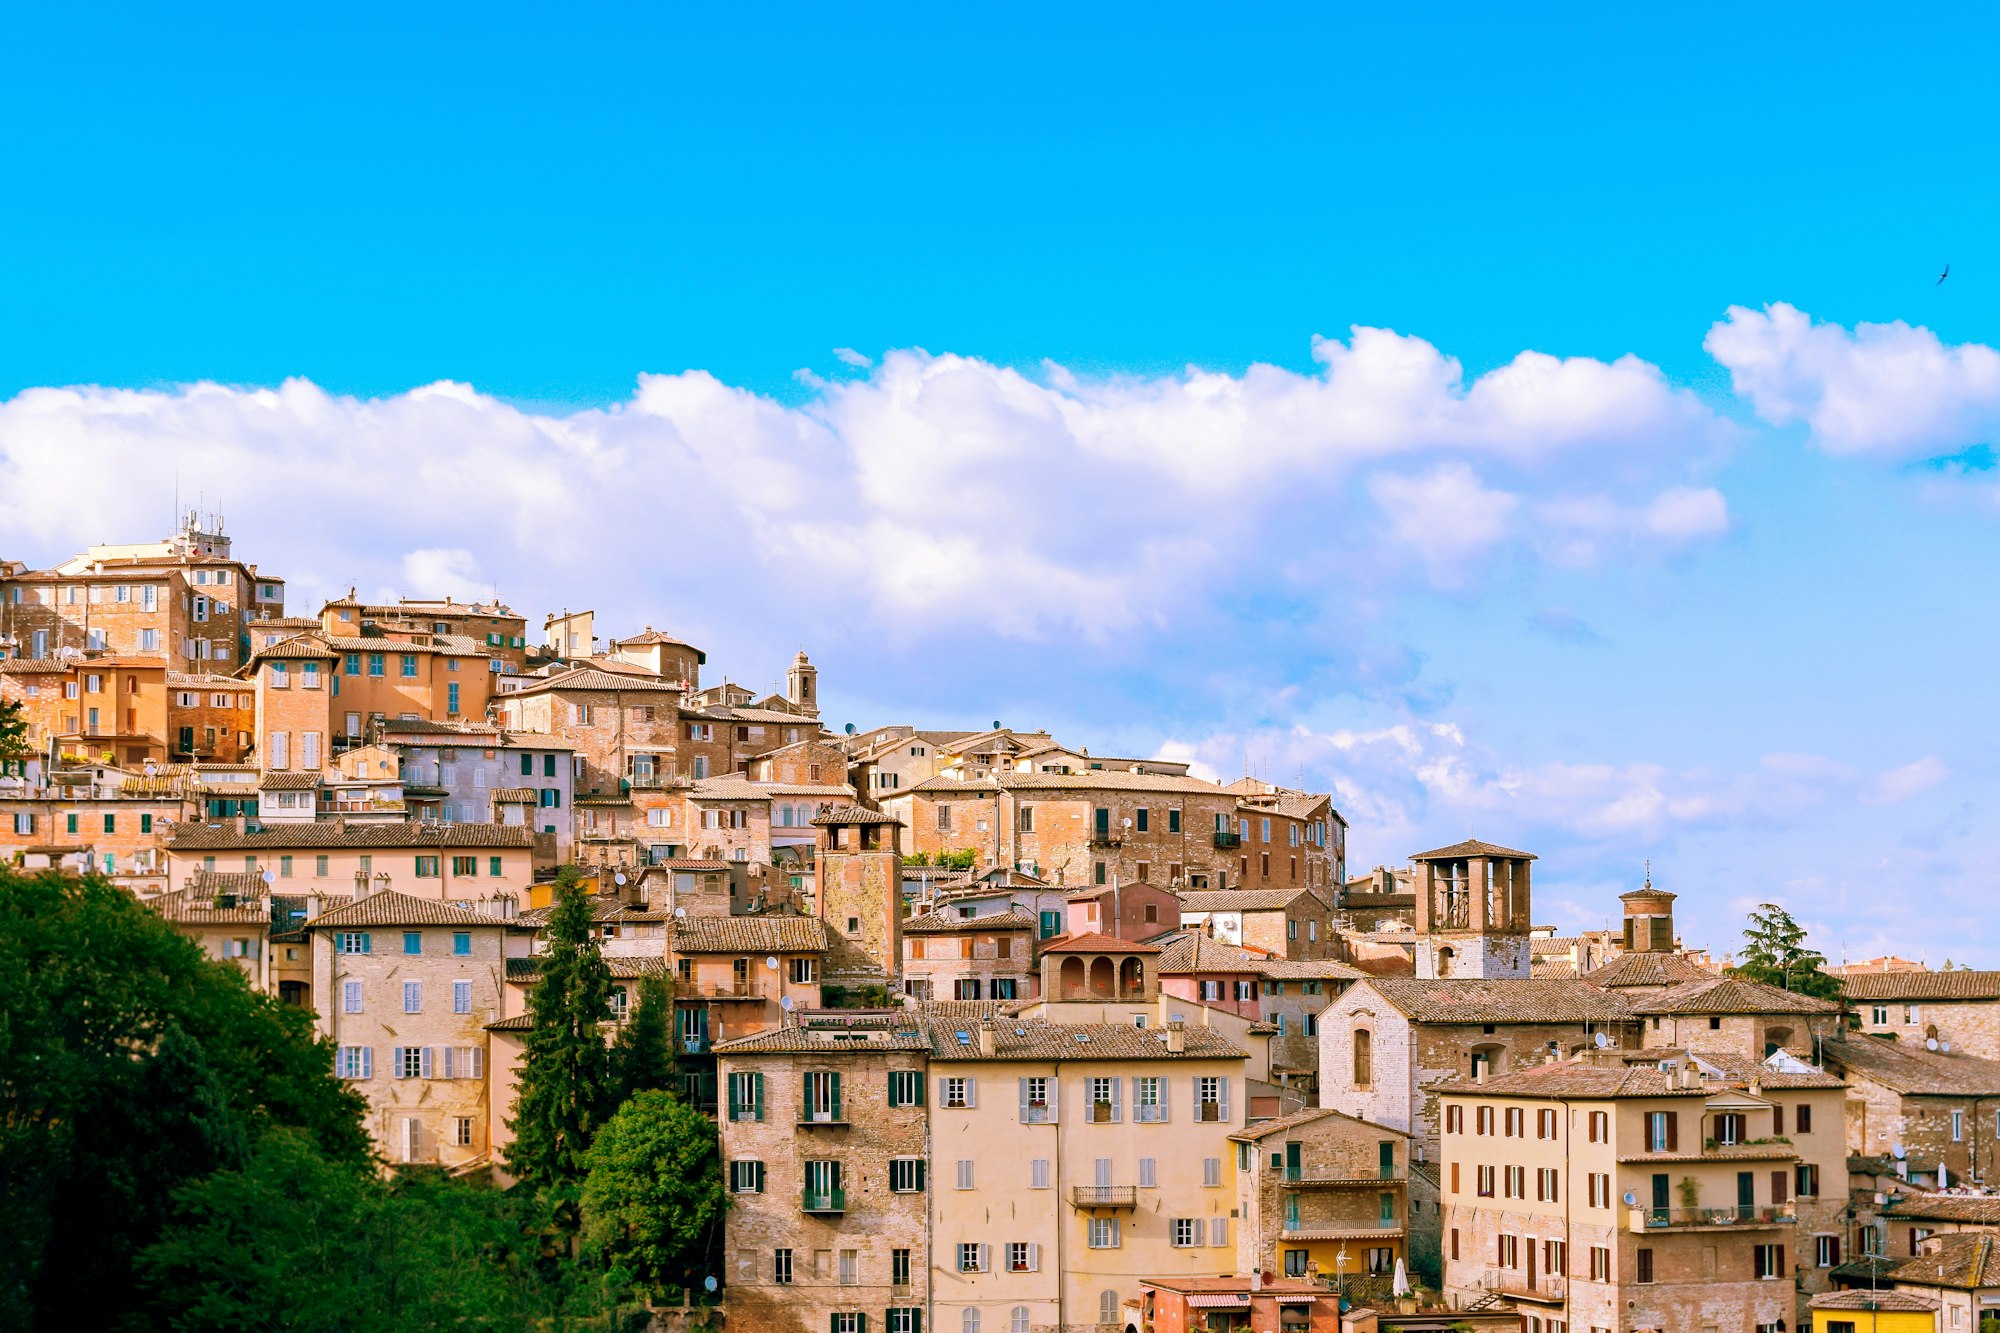 Perugia skyline under azure blue sky. Landscape with old Italian town with medieval houses on a hill